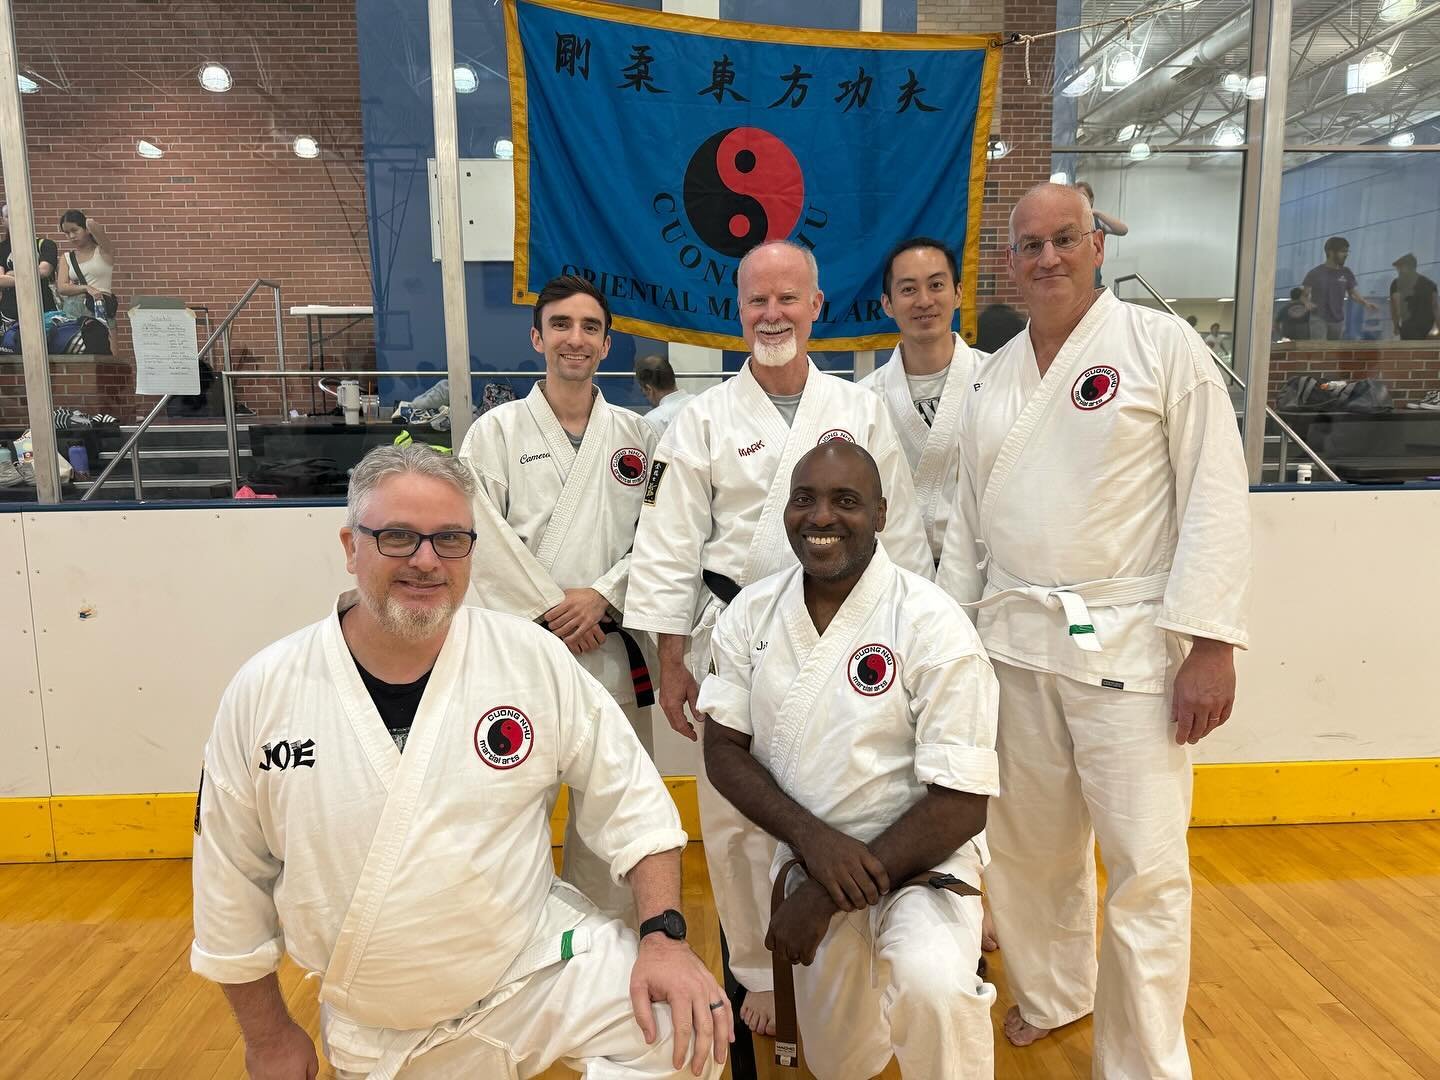 Congratulations to Brian and Joe for promotion to 1-green stripe and to James for promotion to 2-black stripes! You guys did great and represented Kim Hie Si well. #cuongnhu #winterparkcommunitycenter